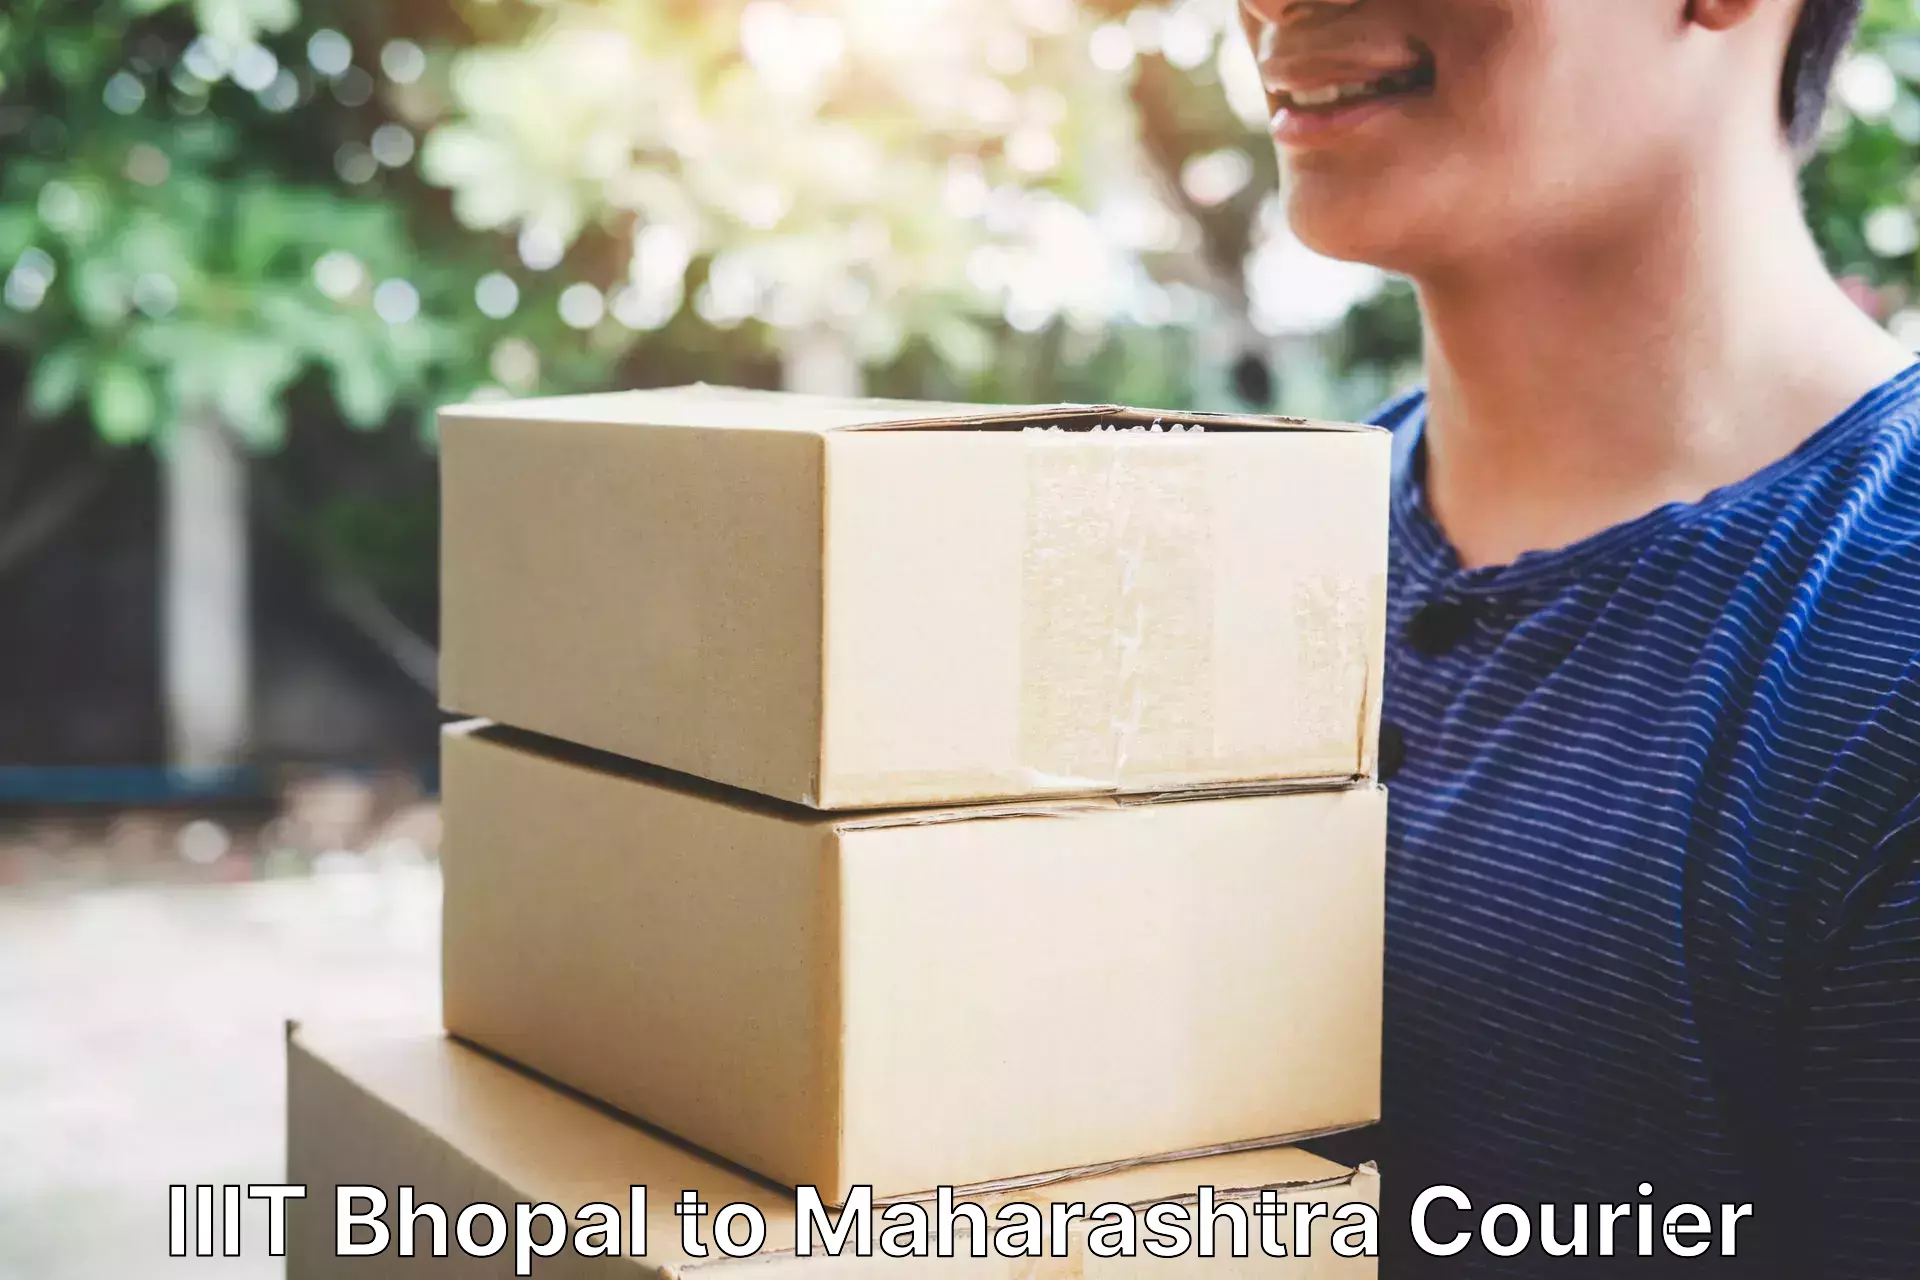 Cash on delivery service IIIT Bhopal to Maharashtra